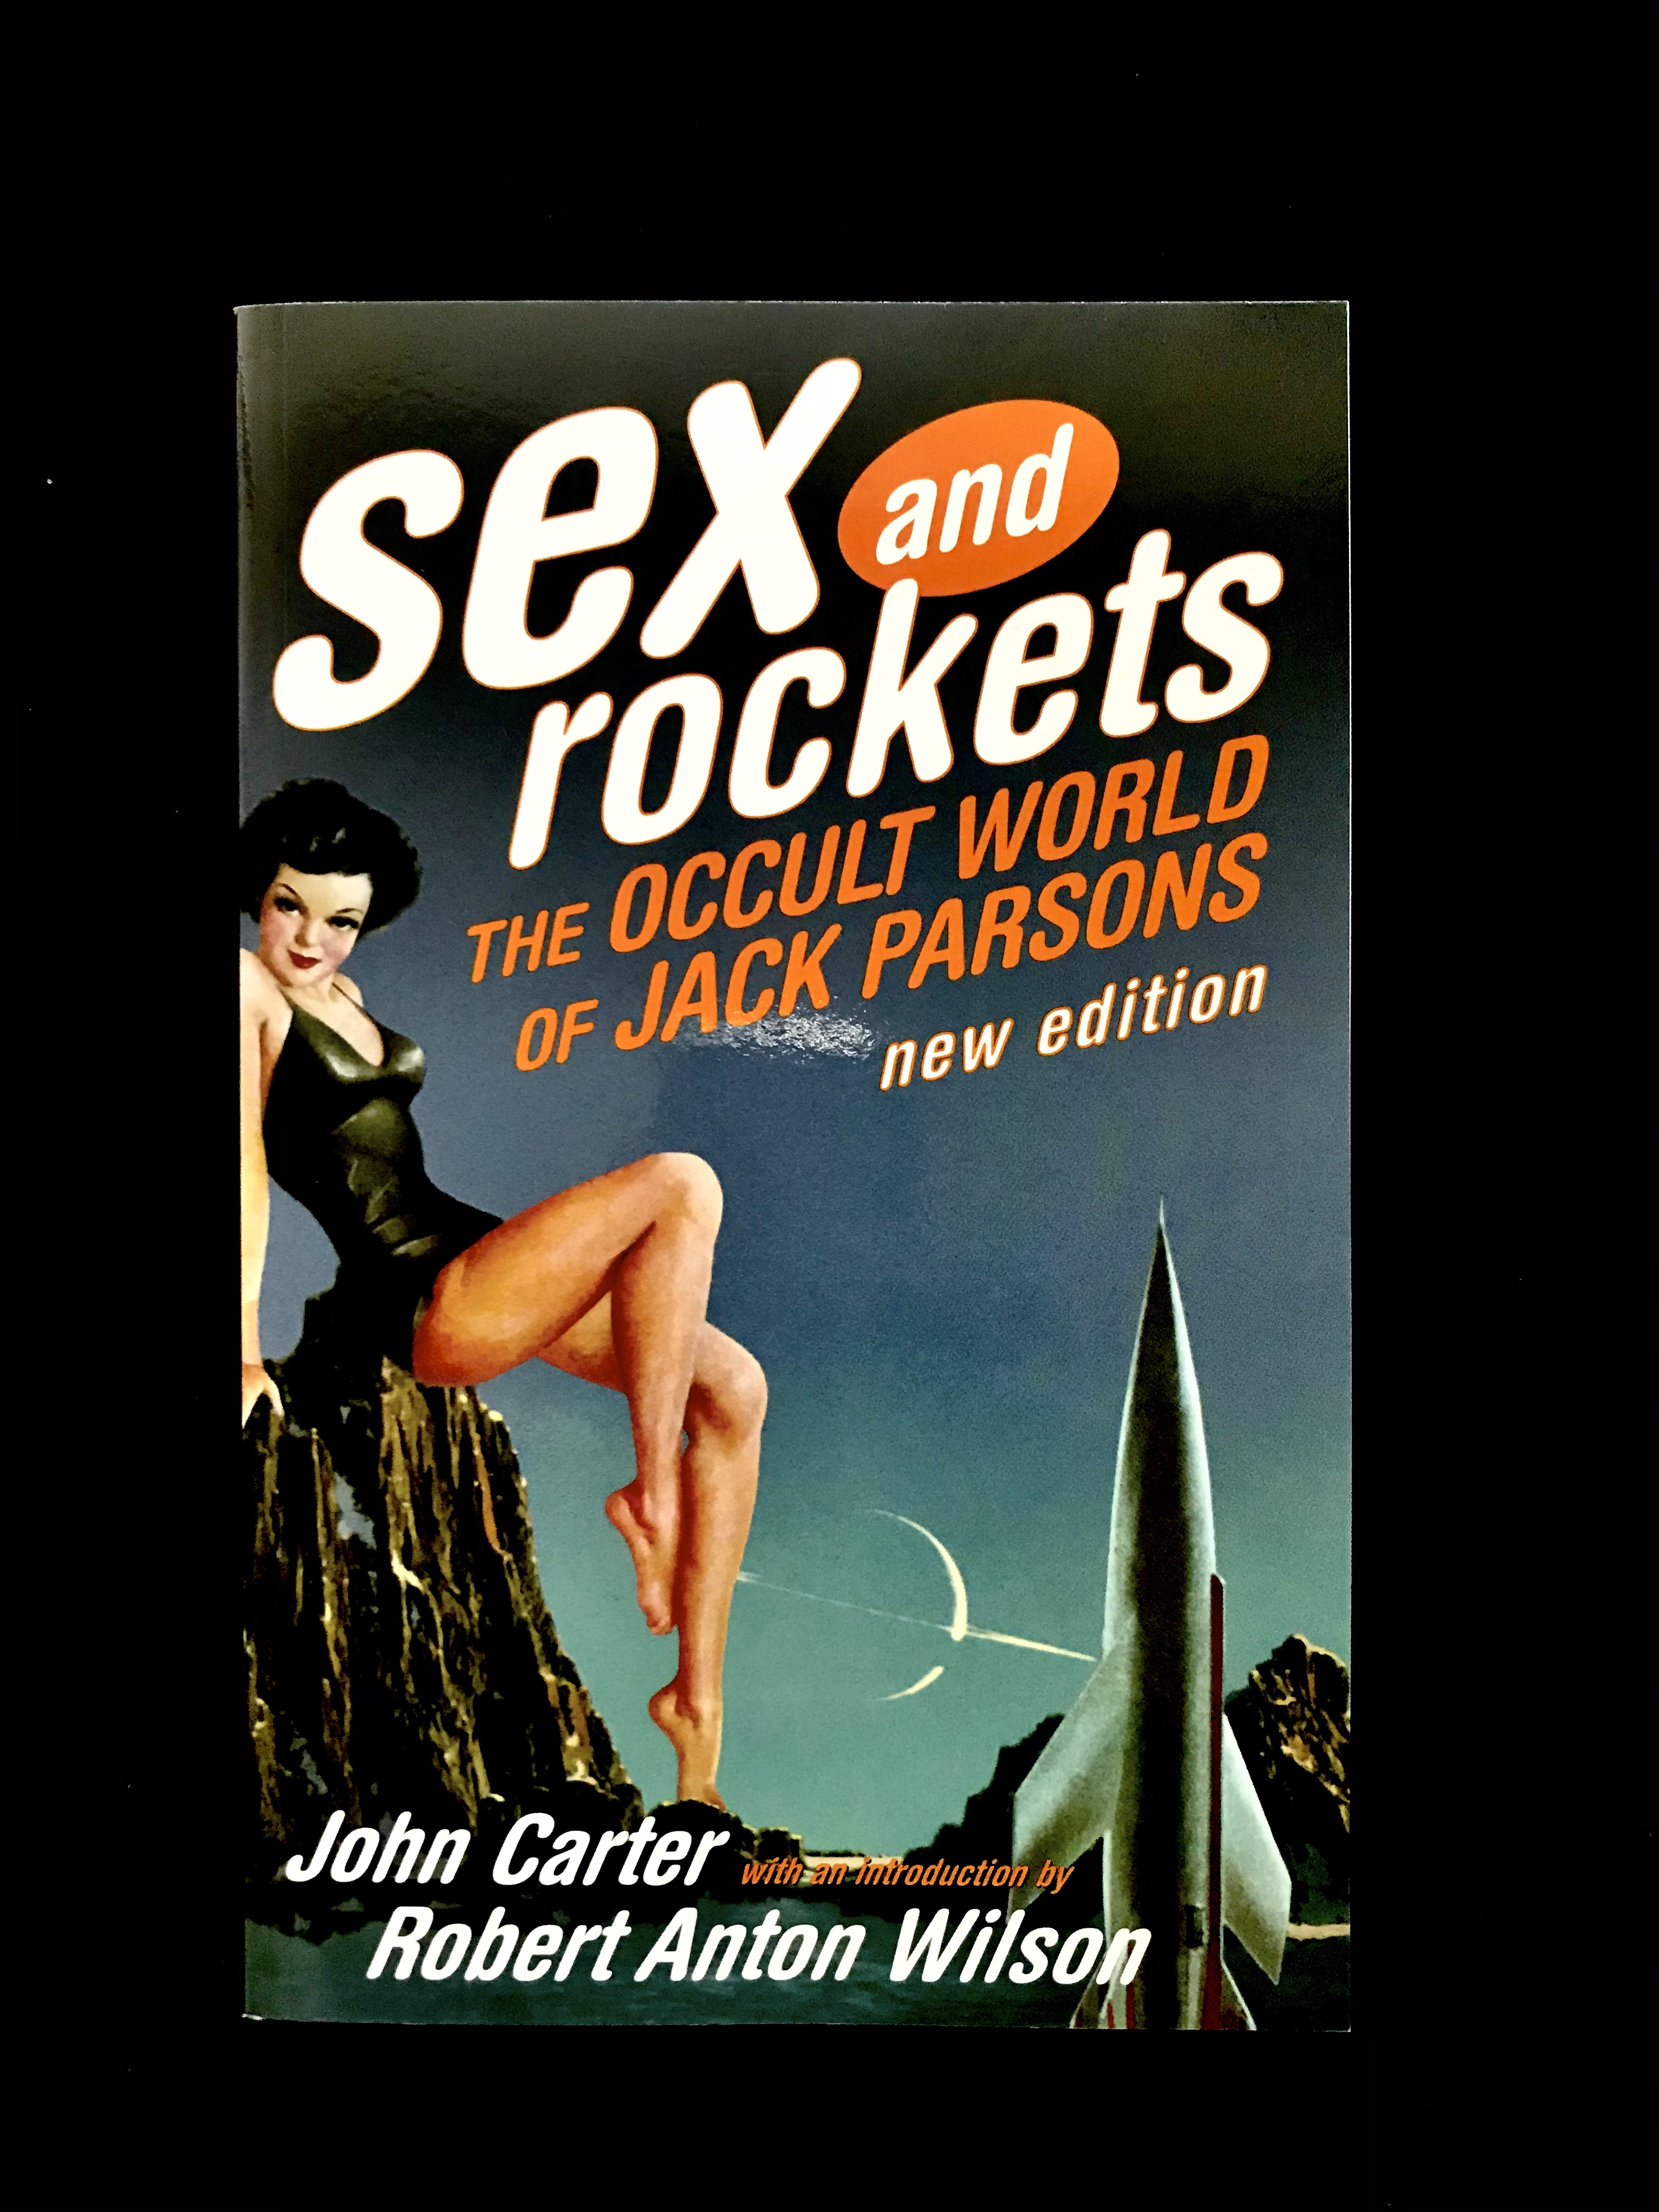 Sex & Rockets The Occult World of Jack Parsons